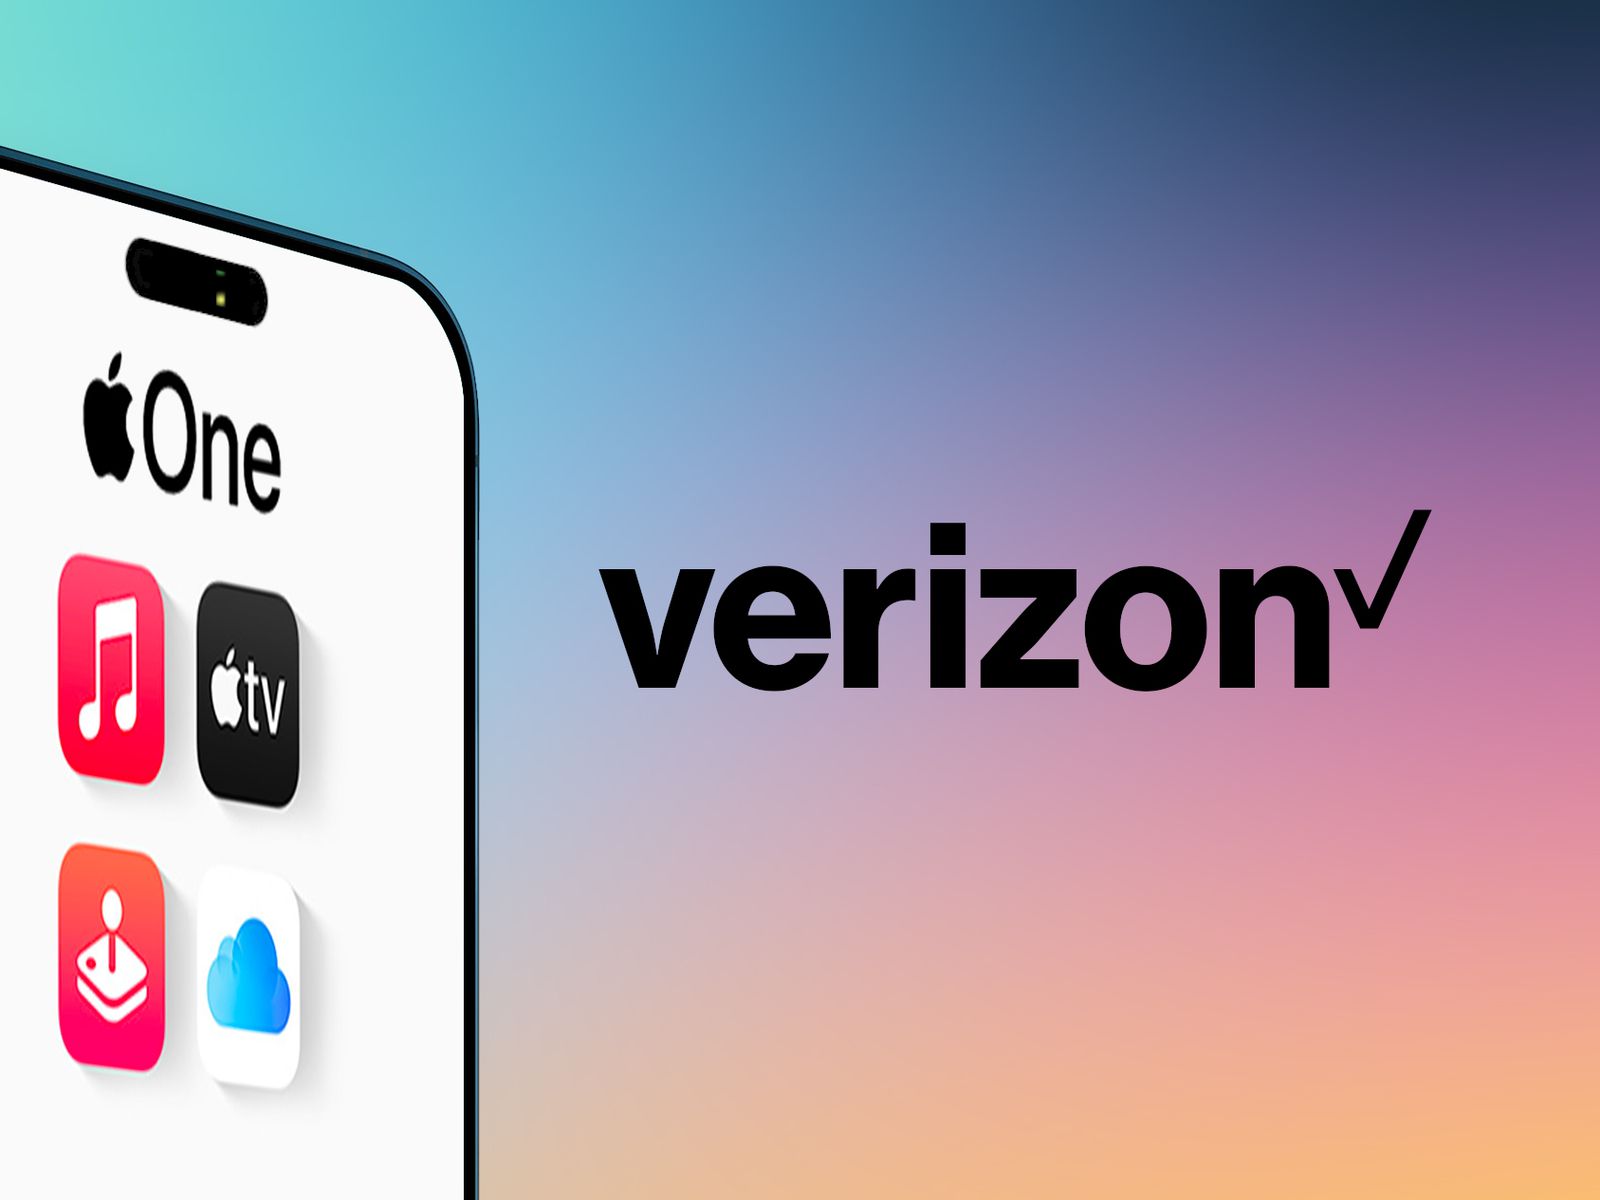 Apple Music is complimentary feature for Verizon 5G Unlimited plan customers